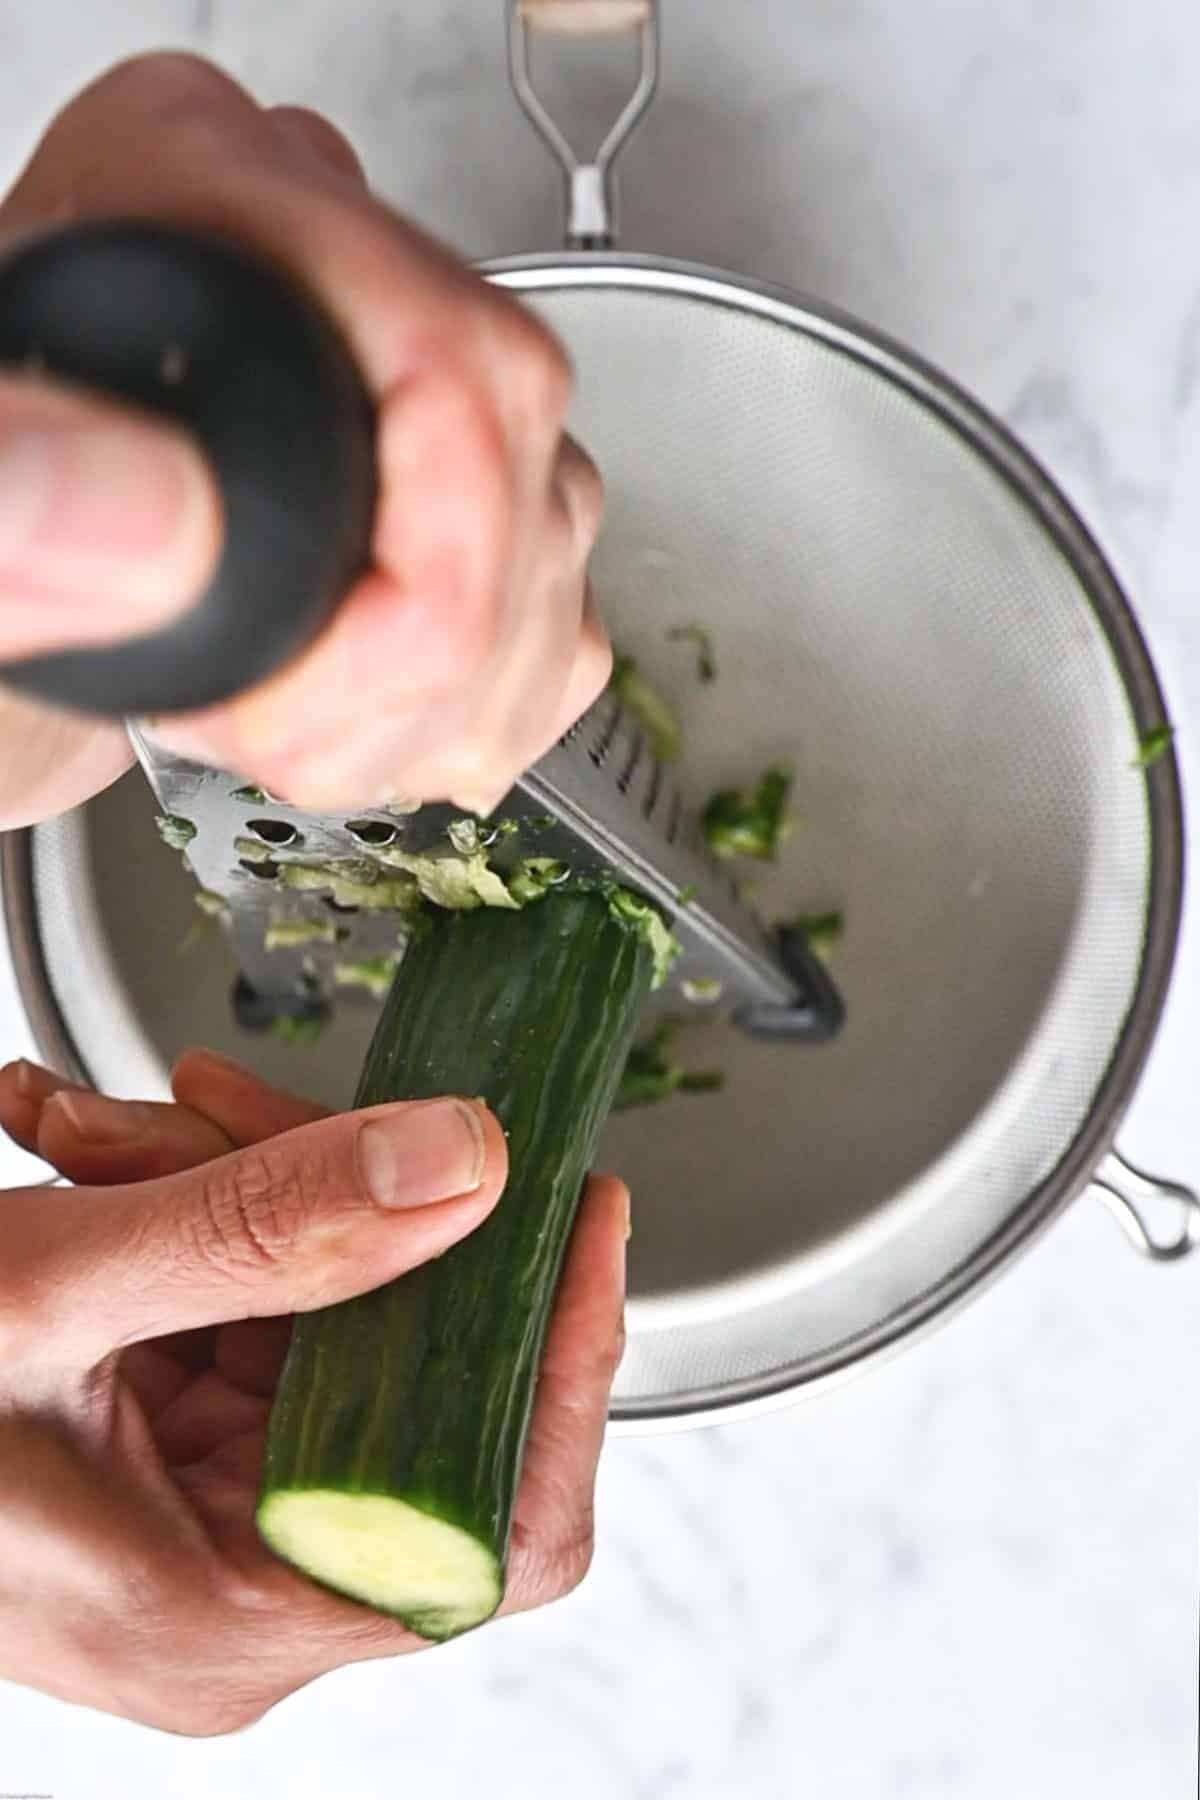 Cucumber being grated with the skin on using a box grater.